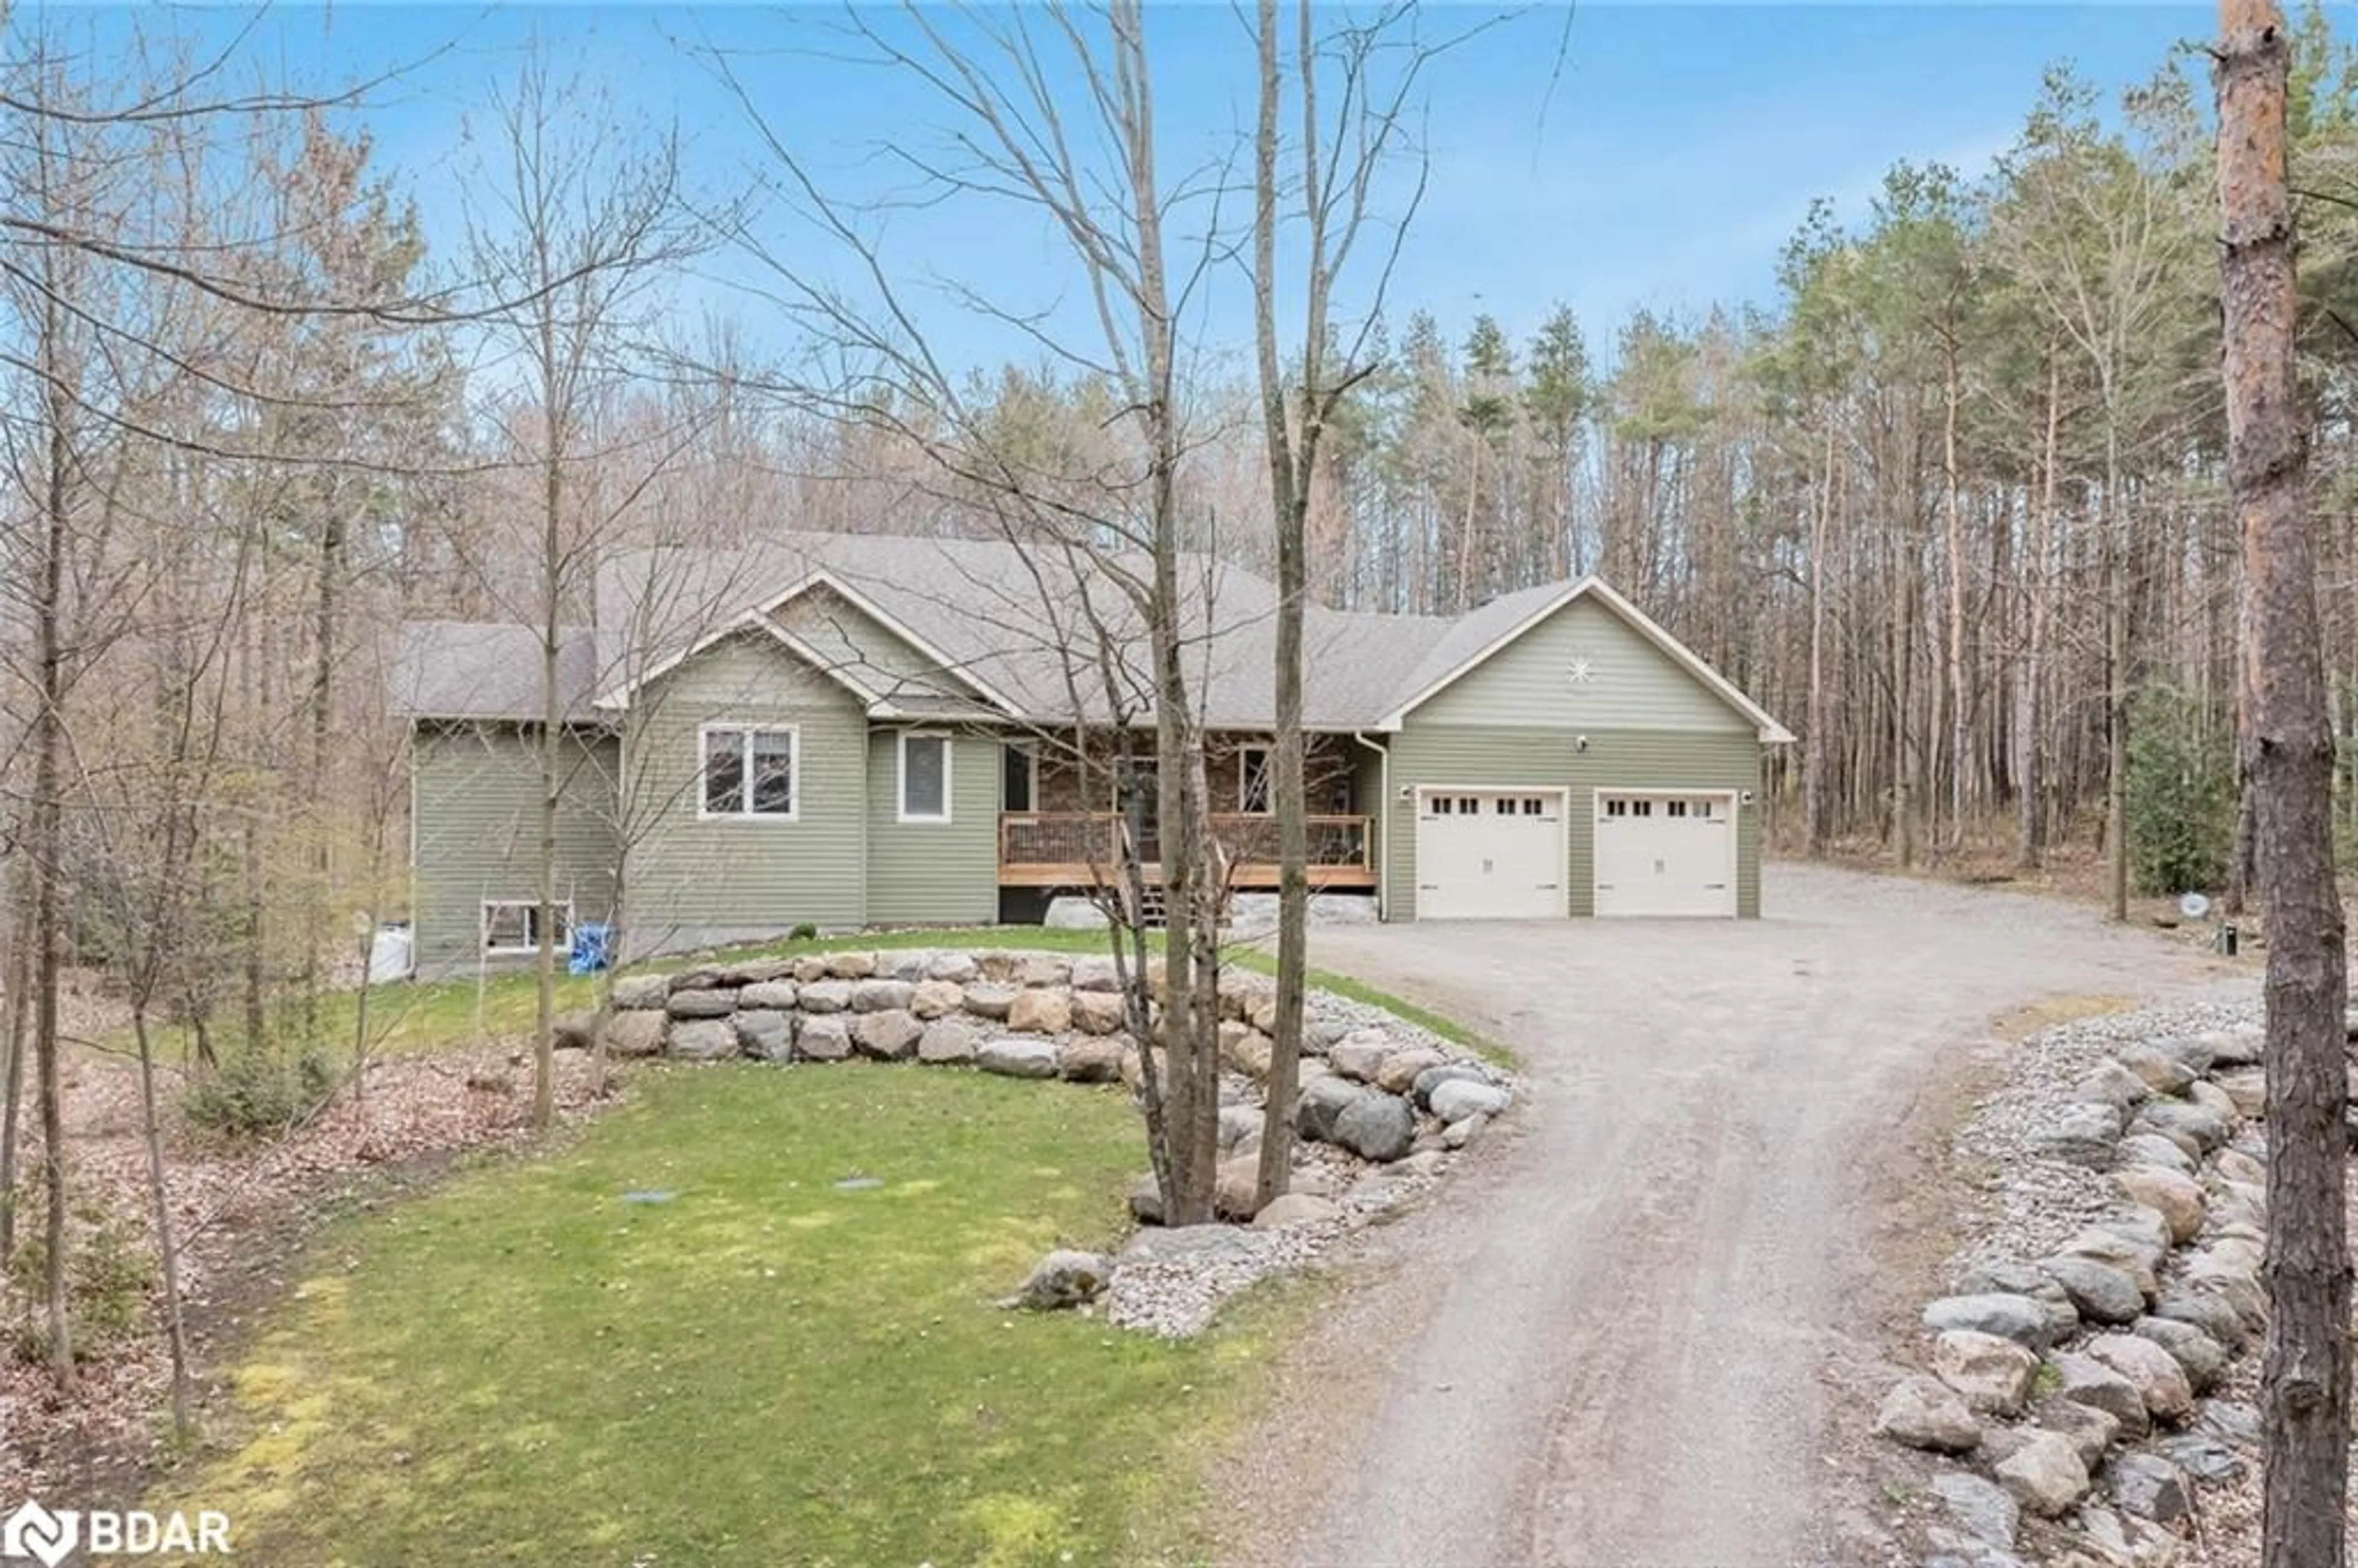 Cottage for 1091 Chemin Du Loup Rd, Tiny Ontario L9M 2H7